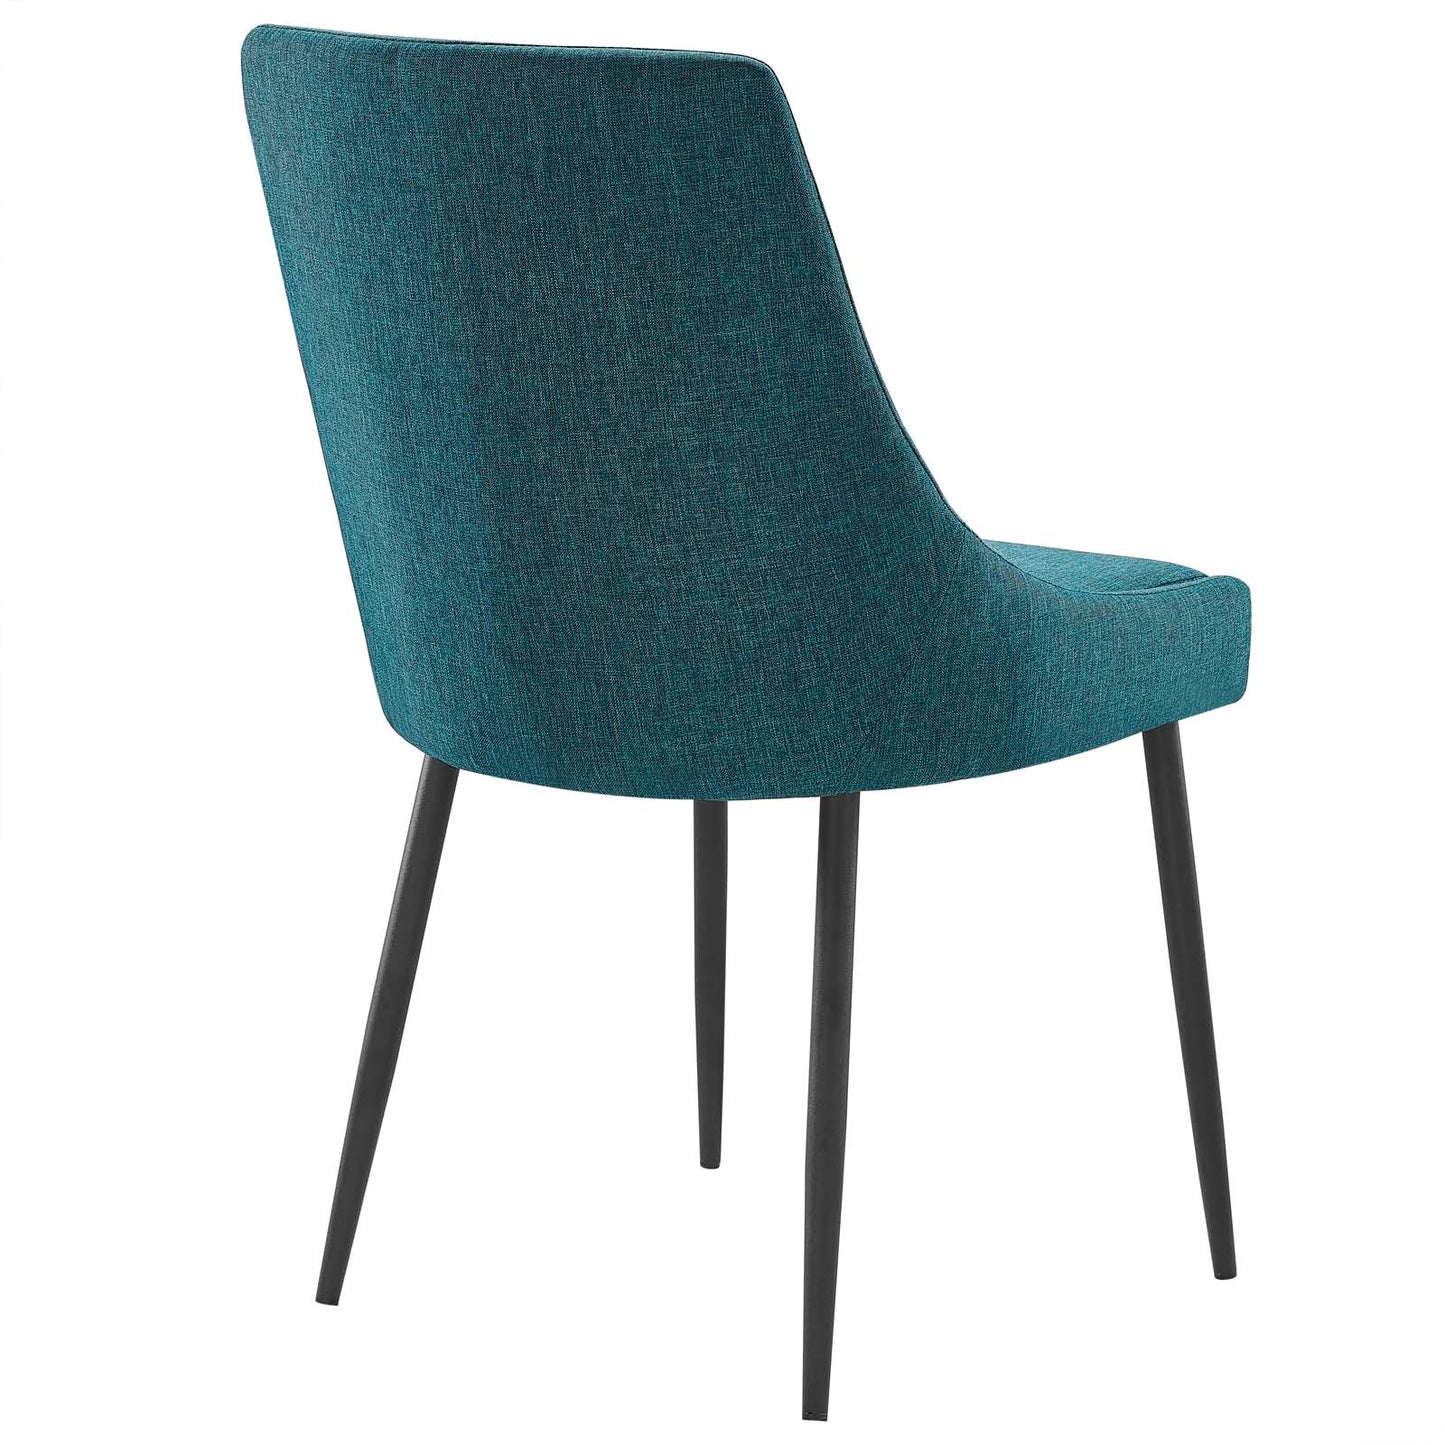 Viscount Upholstered Fabric Dining Chairs - Set of 2 Black Teal EEI-3809-BLK-TEA